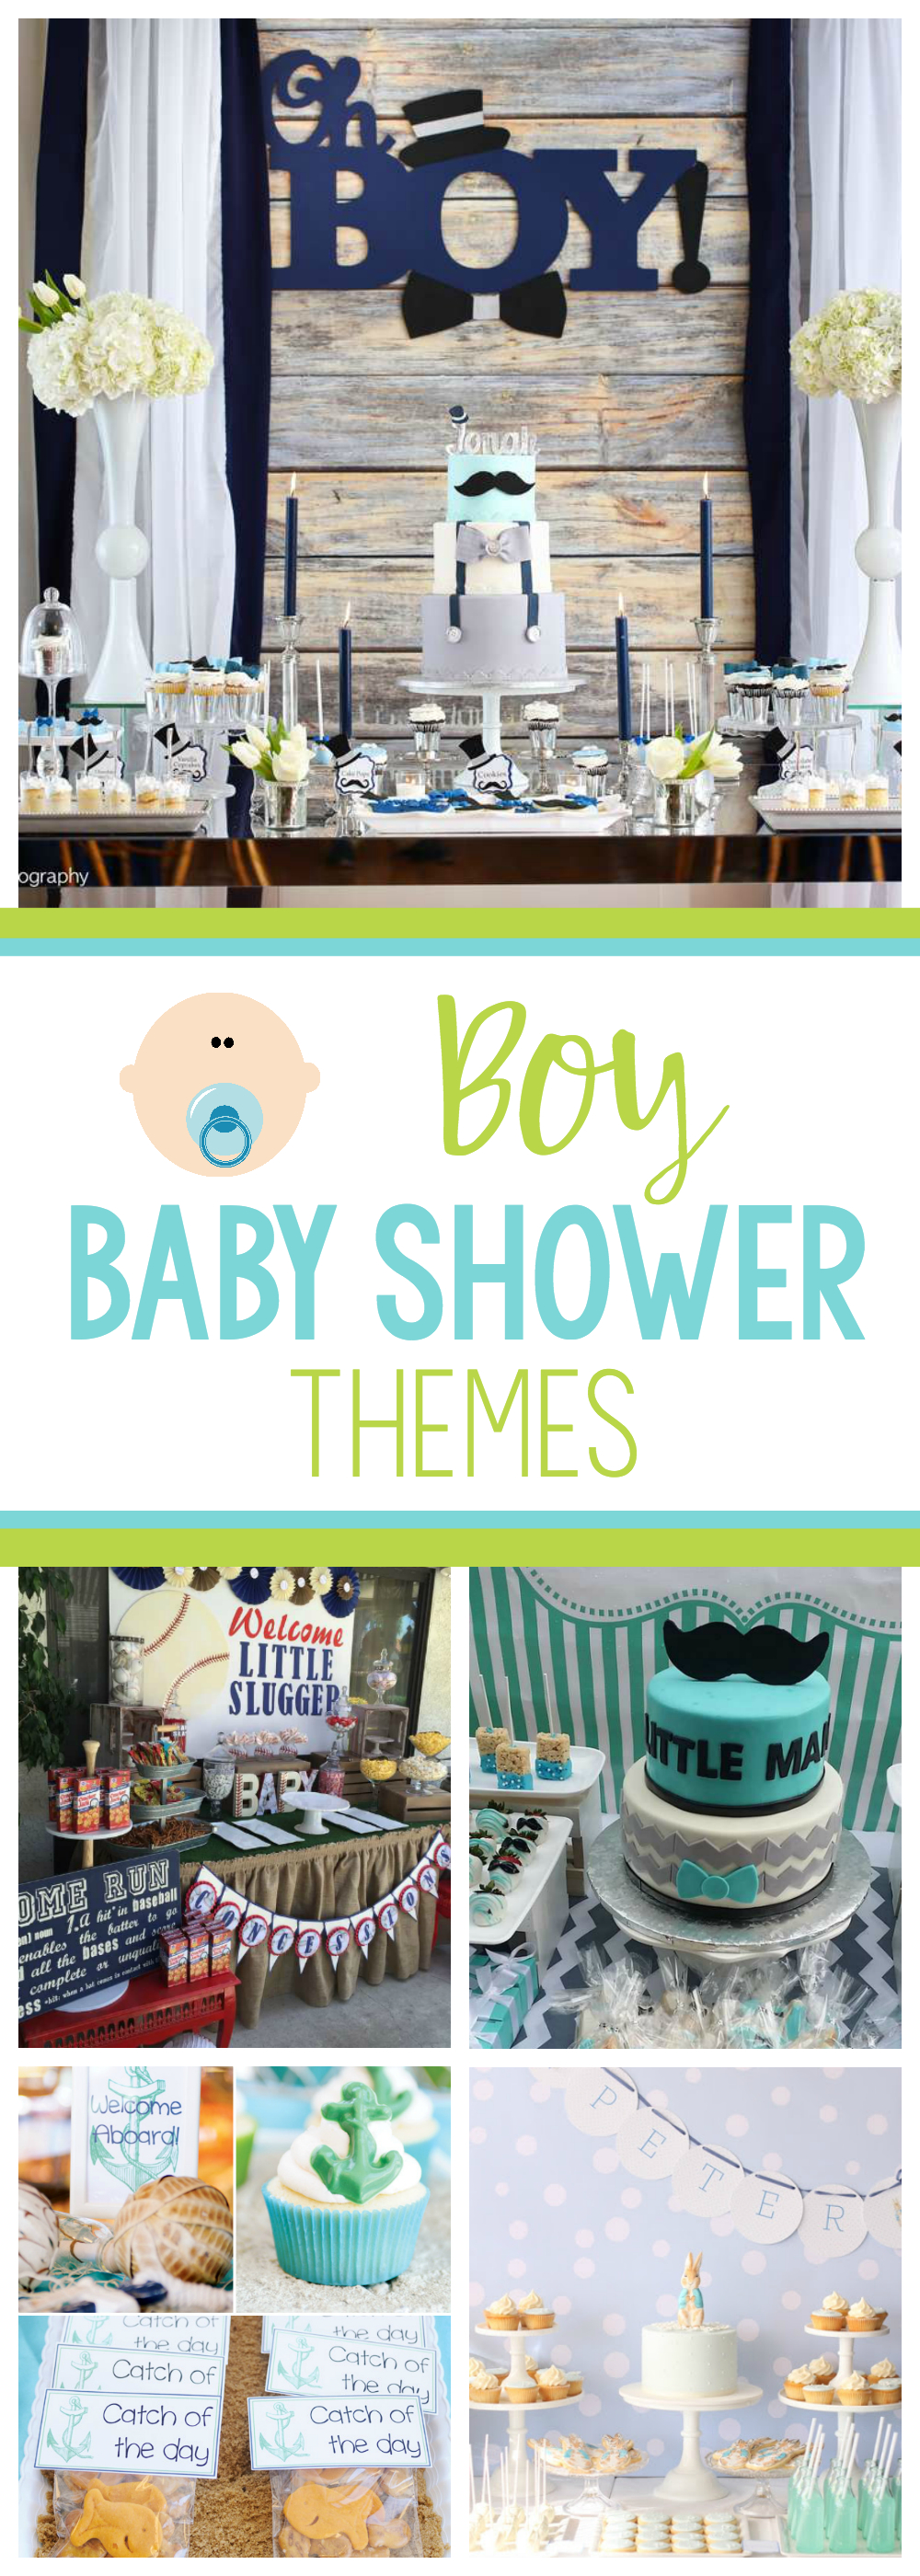 10 Stylish Unique Baby Shower Ideas For Boys baby boy baby shower themes fun squared 3 2022